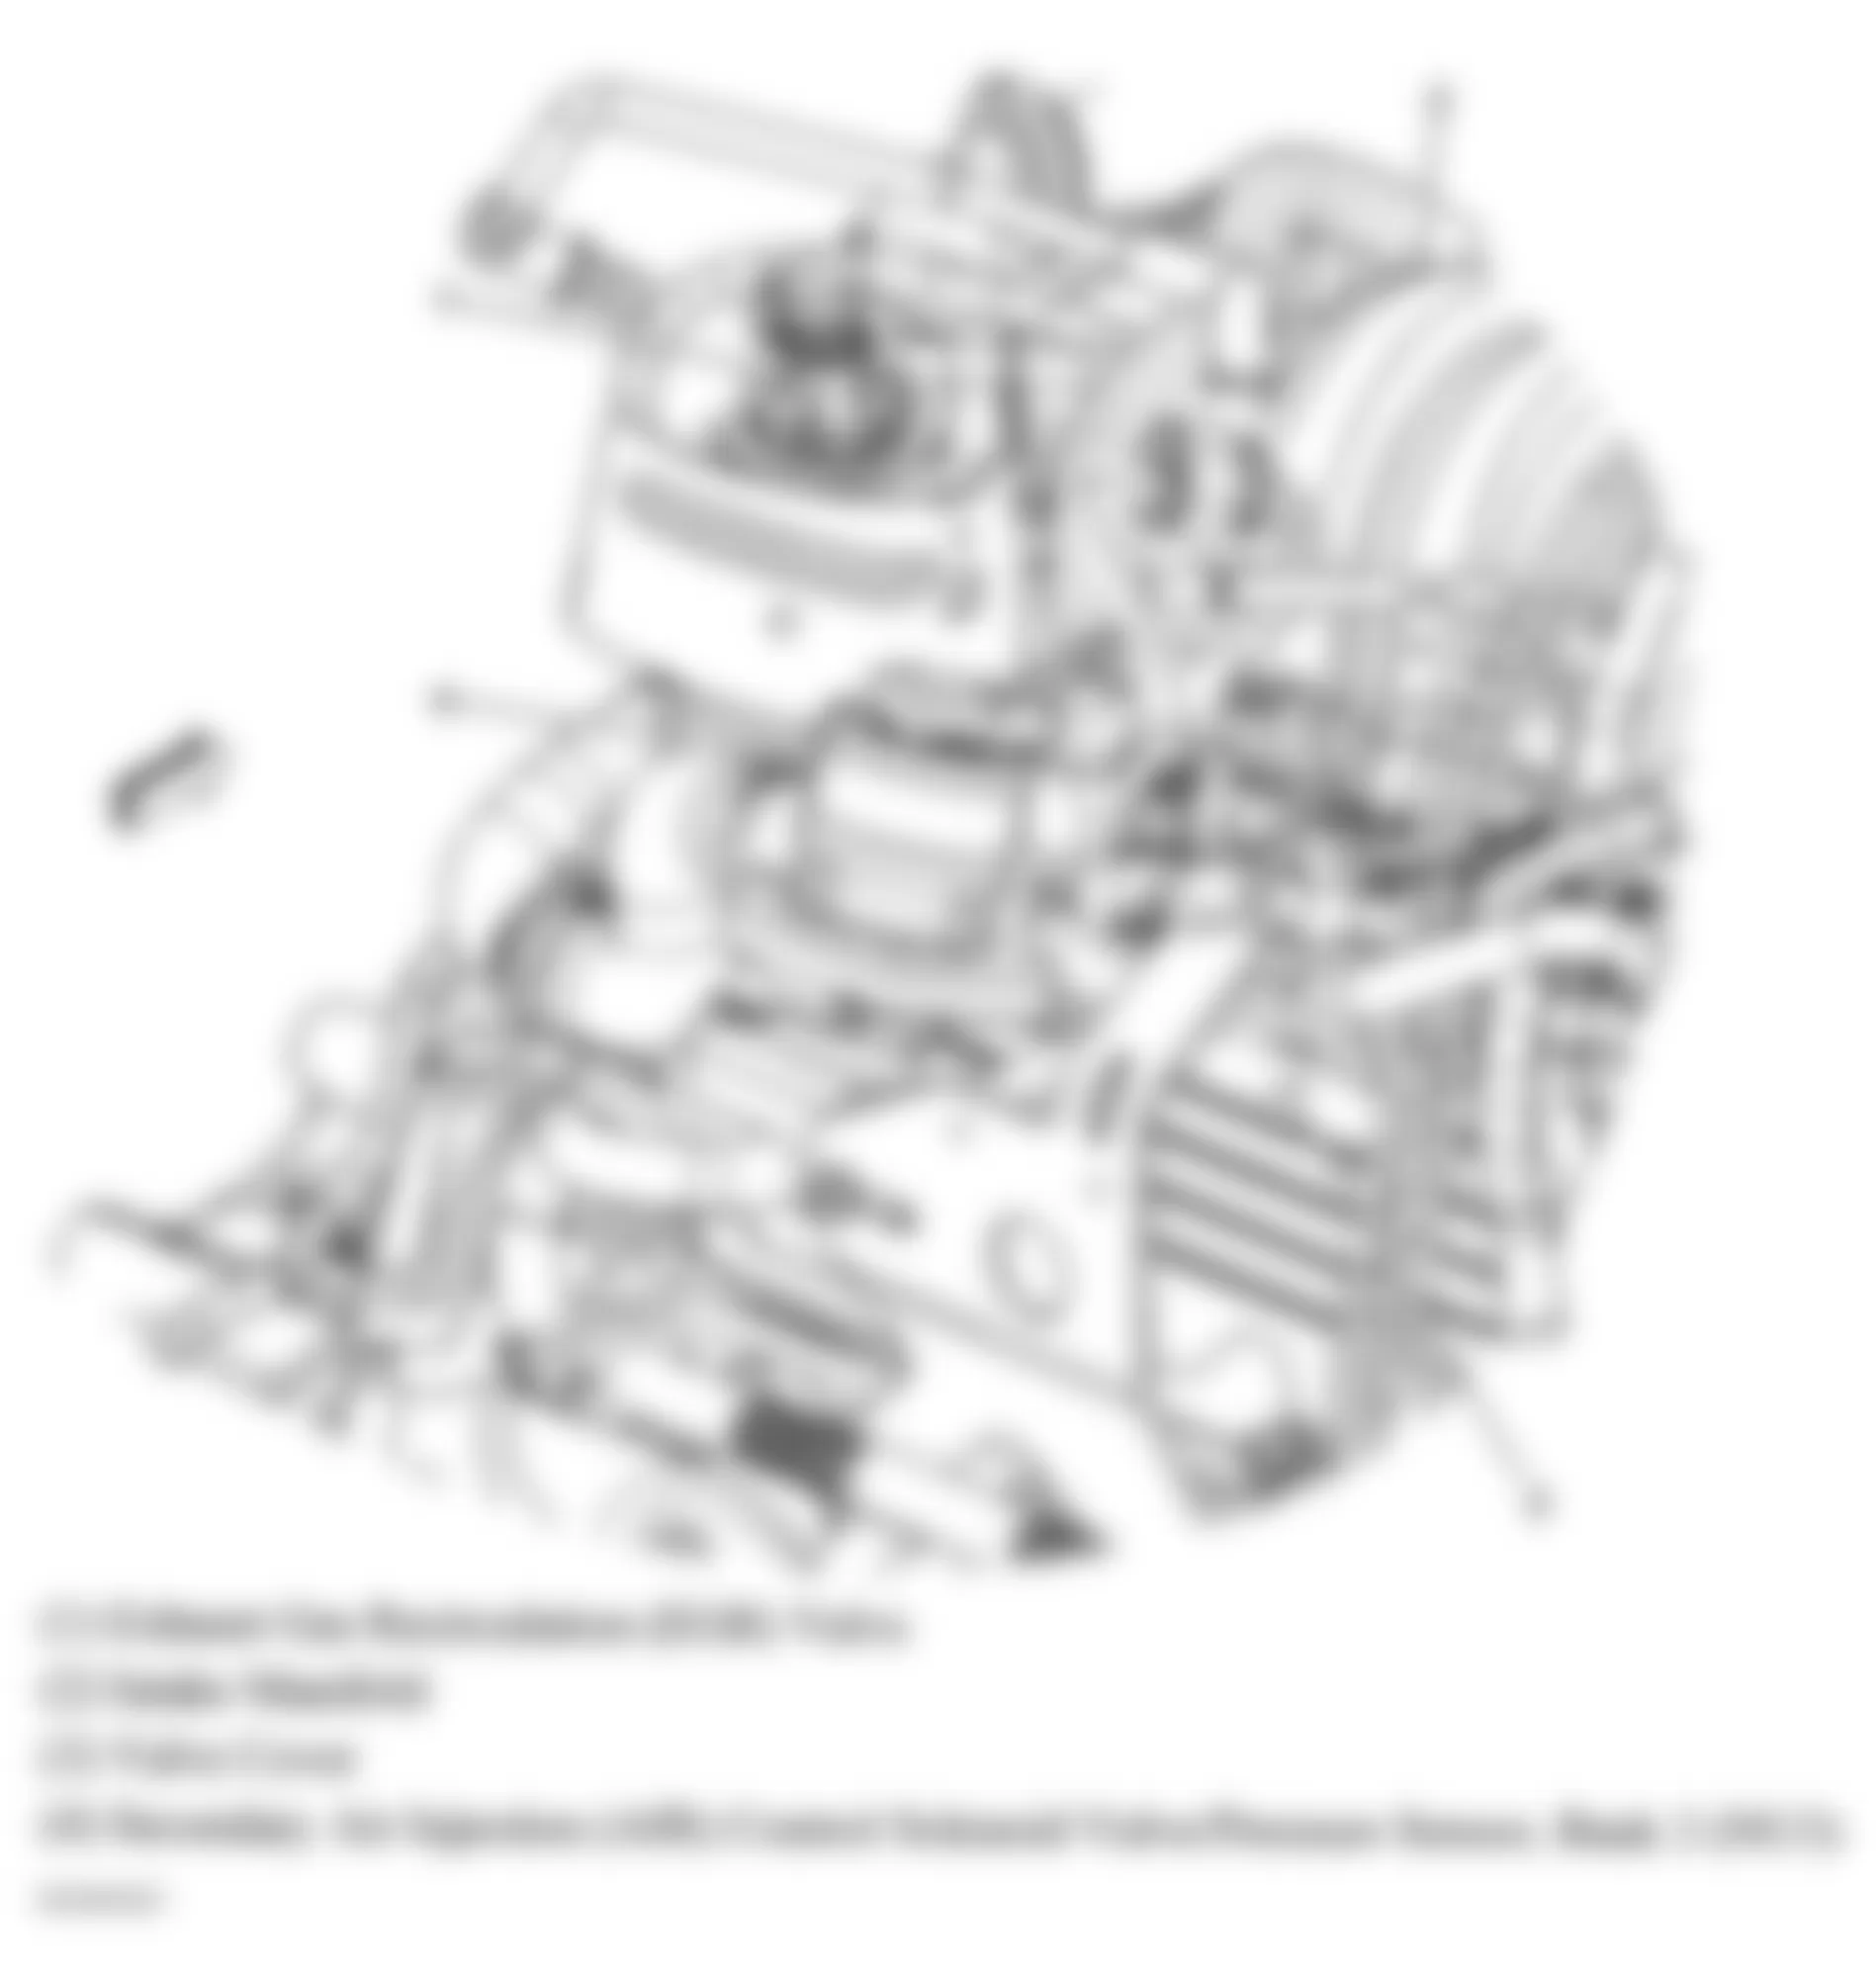 Buick LaCrosse CXS 2006 - Component Locations -  Upper Rear Of Engine (3.8L)